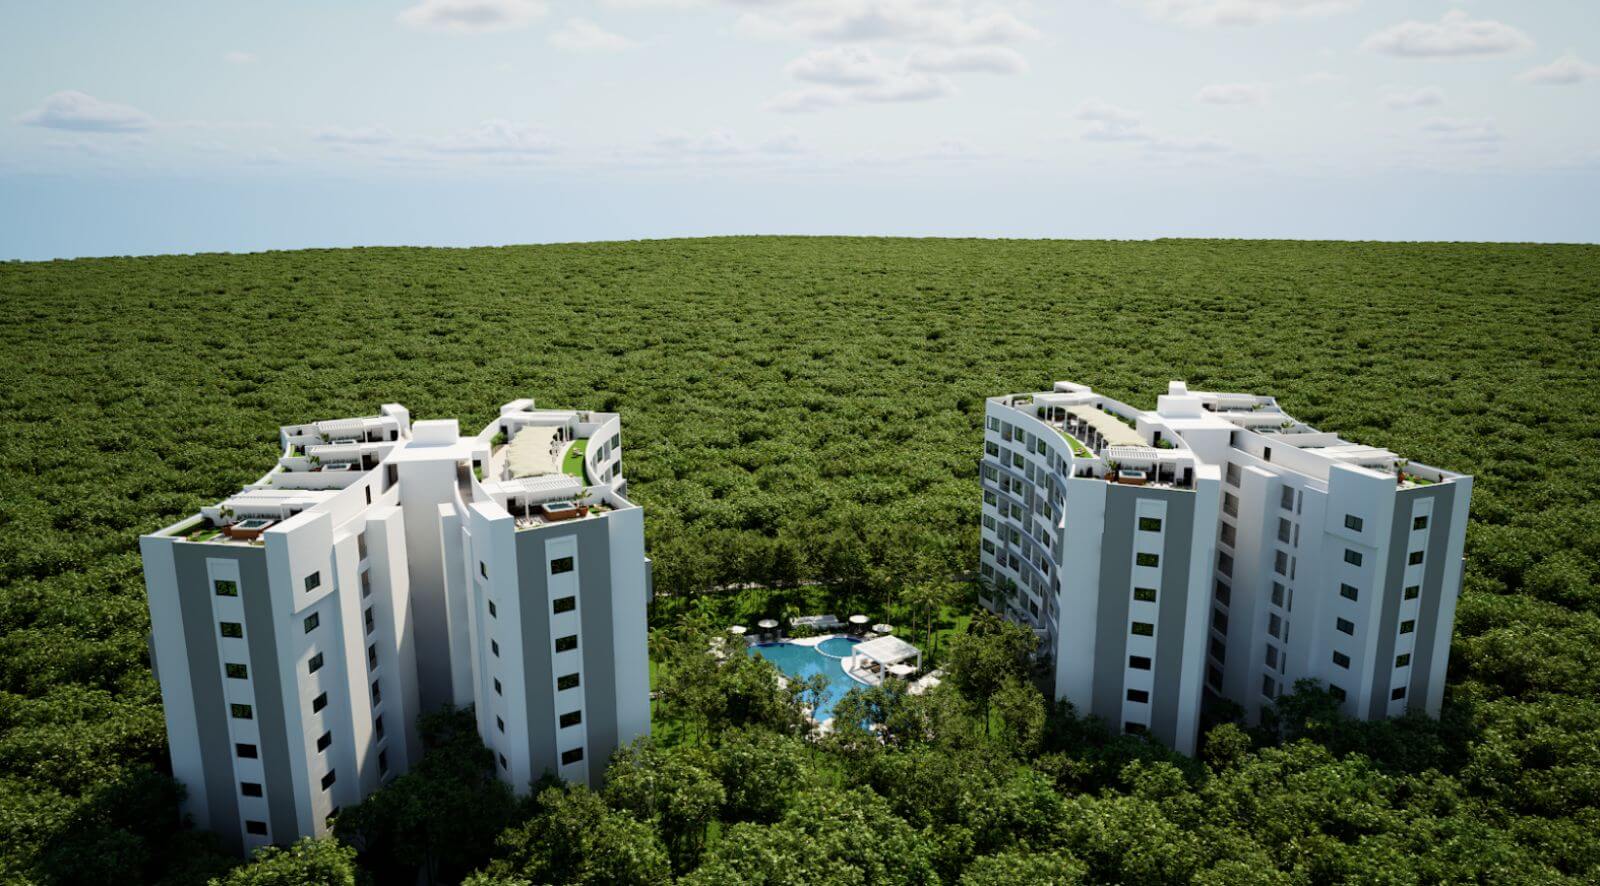 Apartment with private garden lock off system, ocean view from rooftop, 190 meters from the beach, pool view.